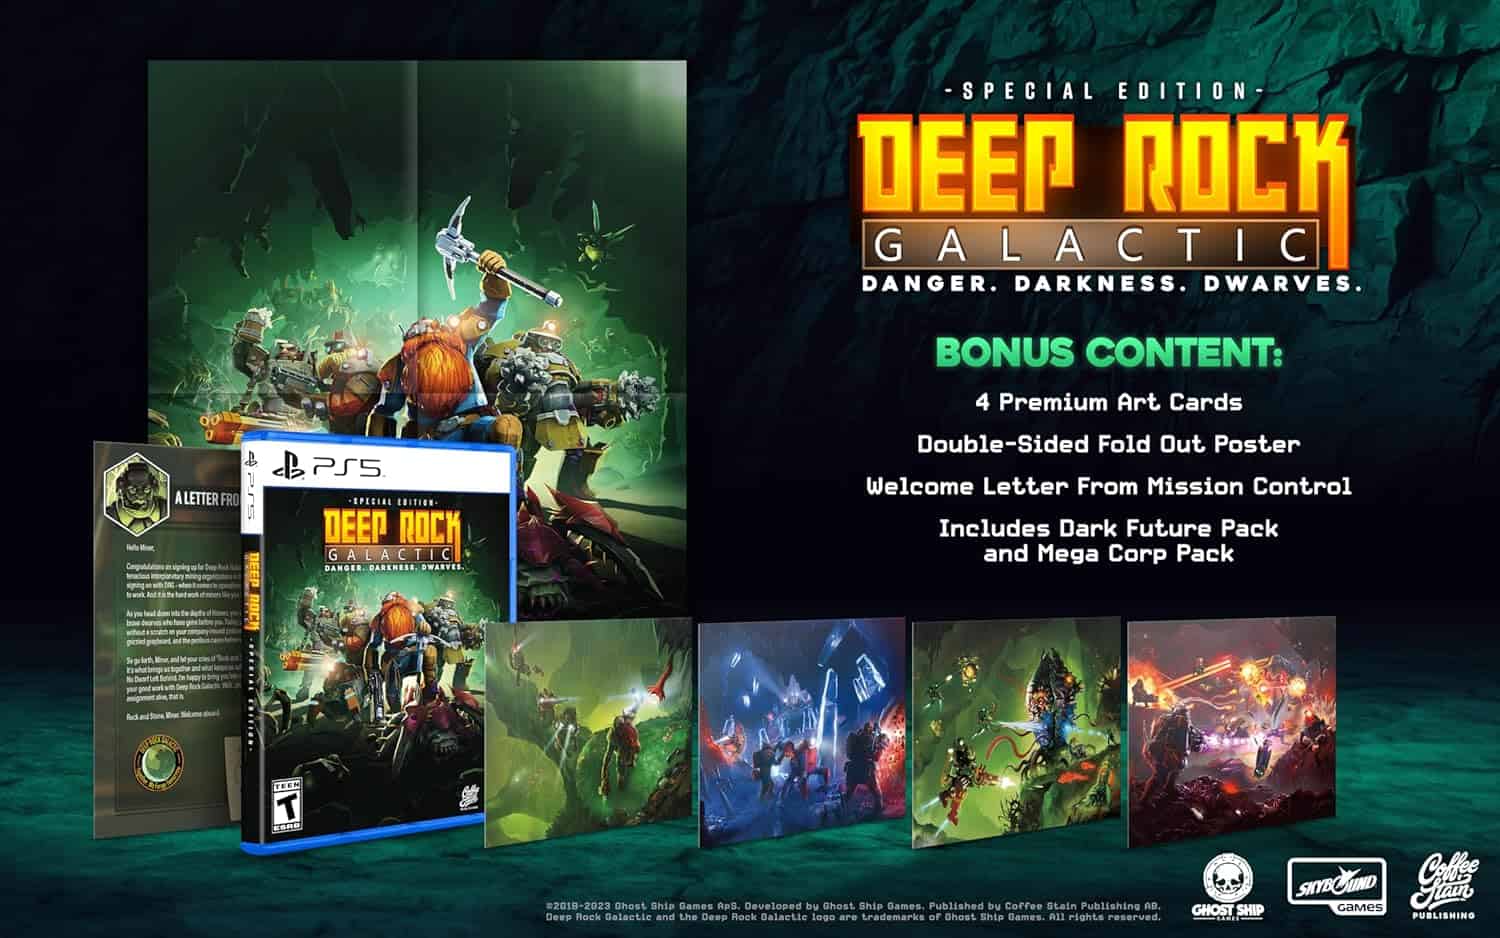 The Deep Rock Galactic Special Edition for PS5, and its bonus content and merch.